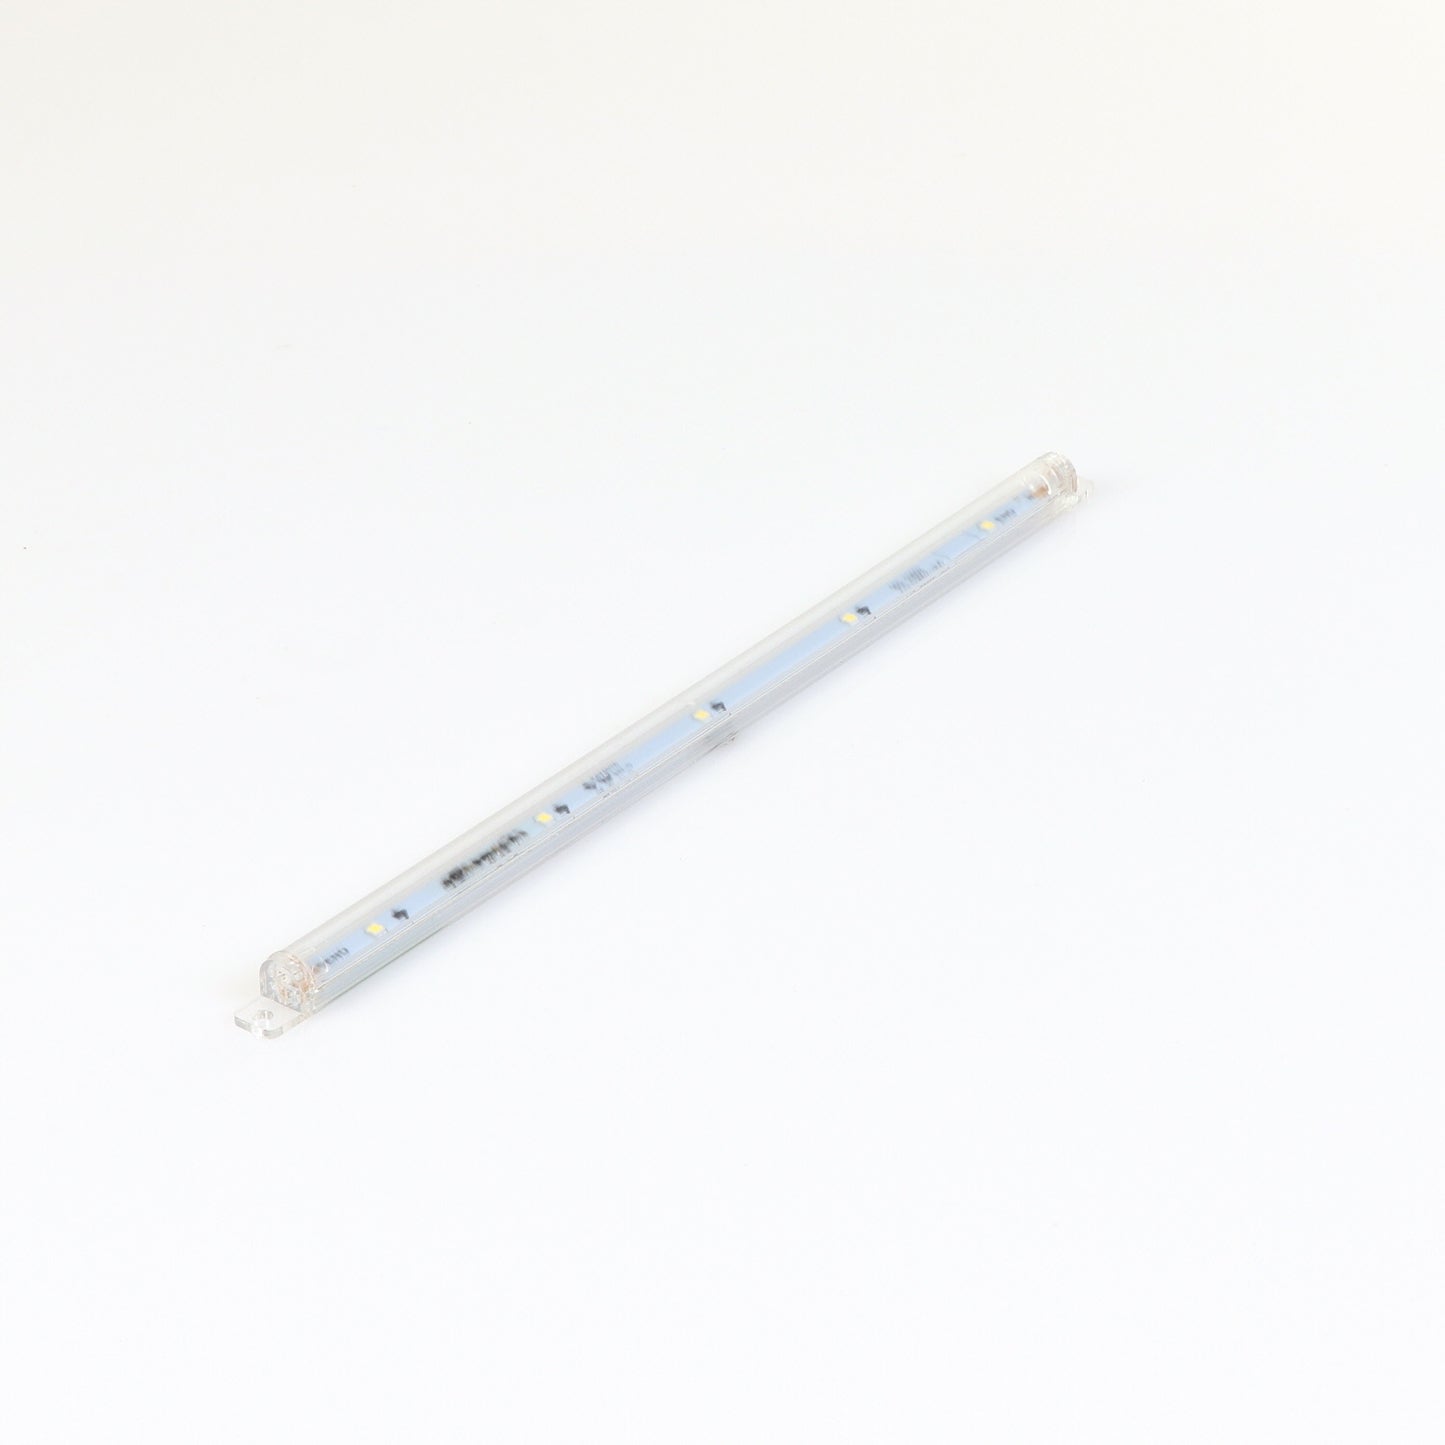 LED module for a wide variety of model applications, Part #205409(SKU - 205409)